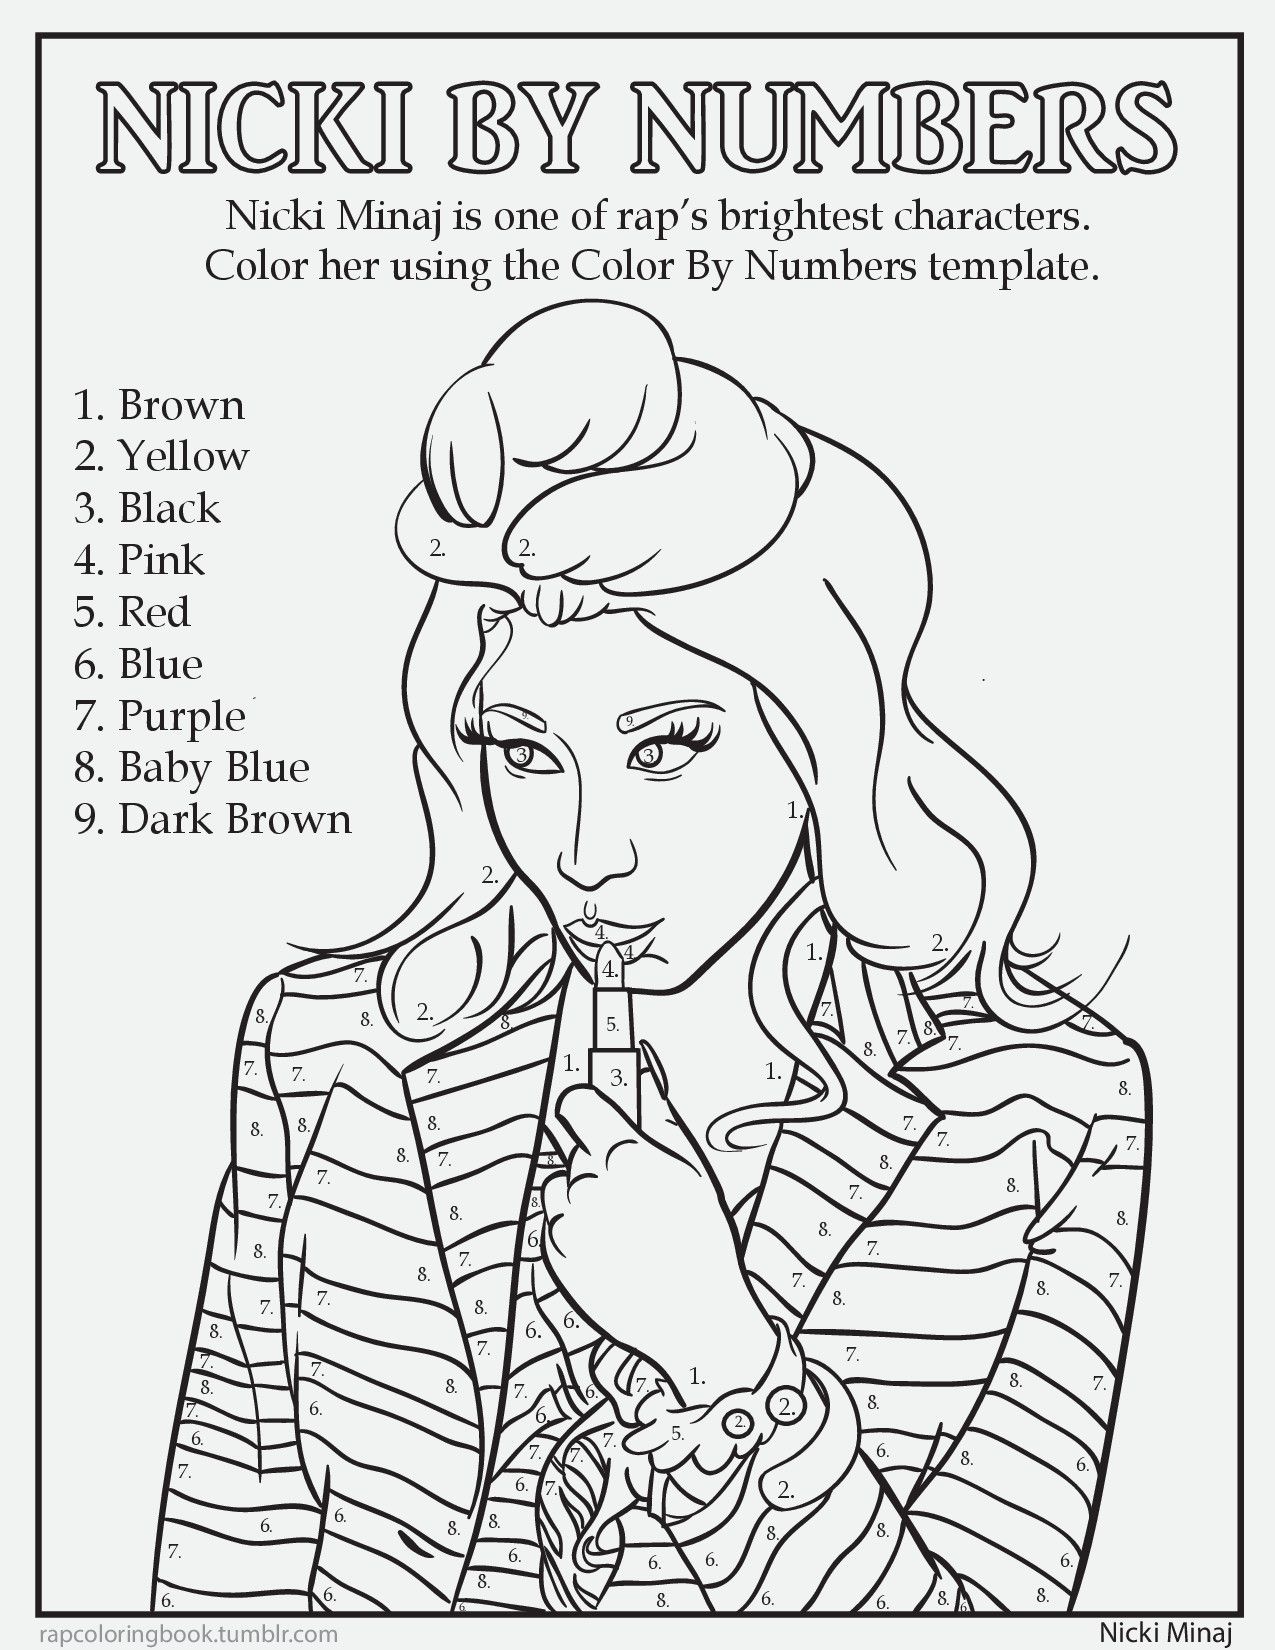 THE RAP COLORING BOOK - Wine & Bowties